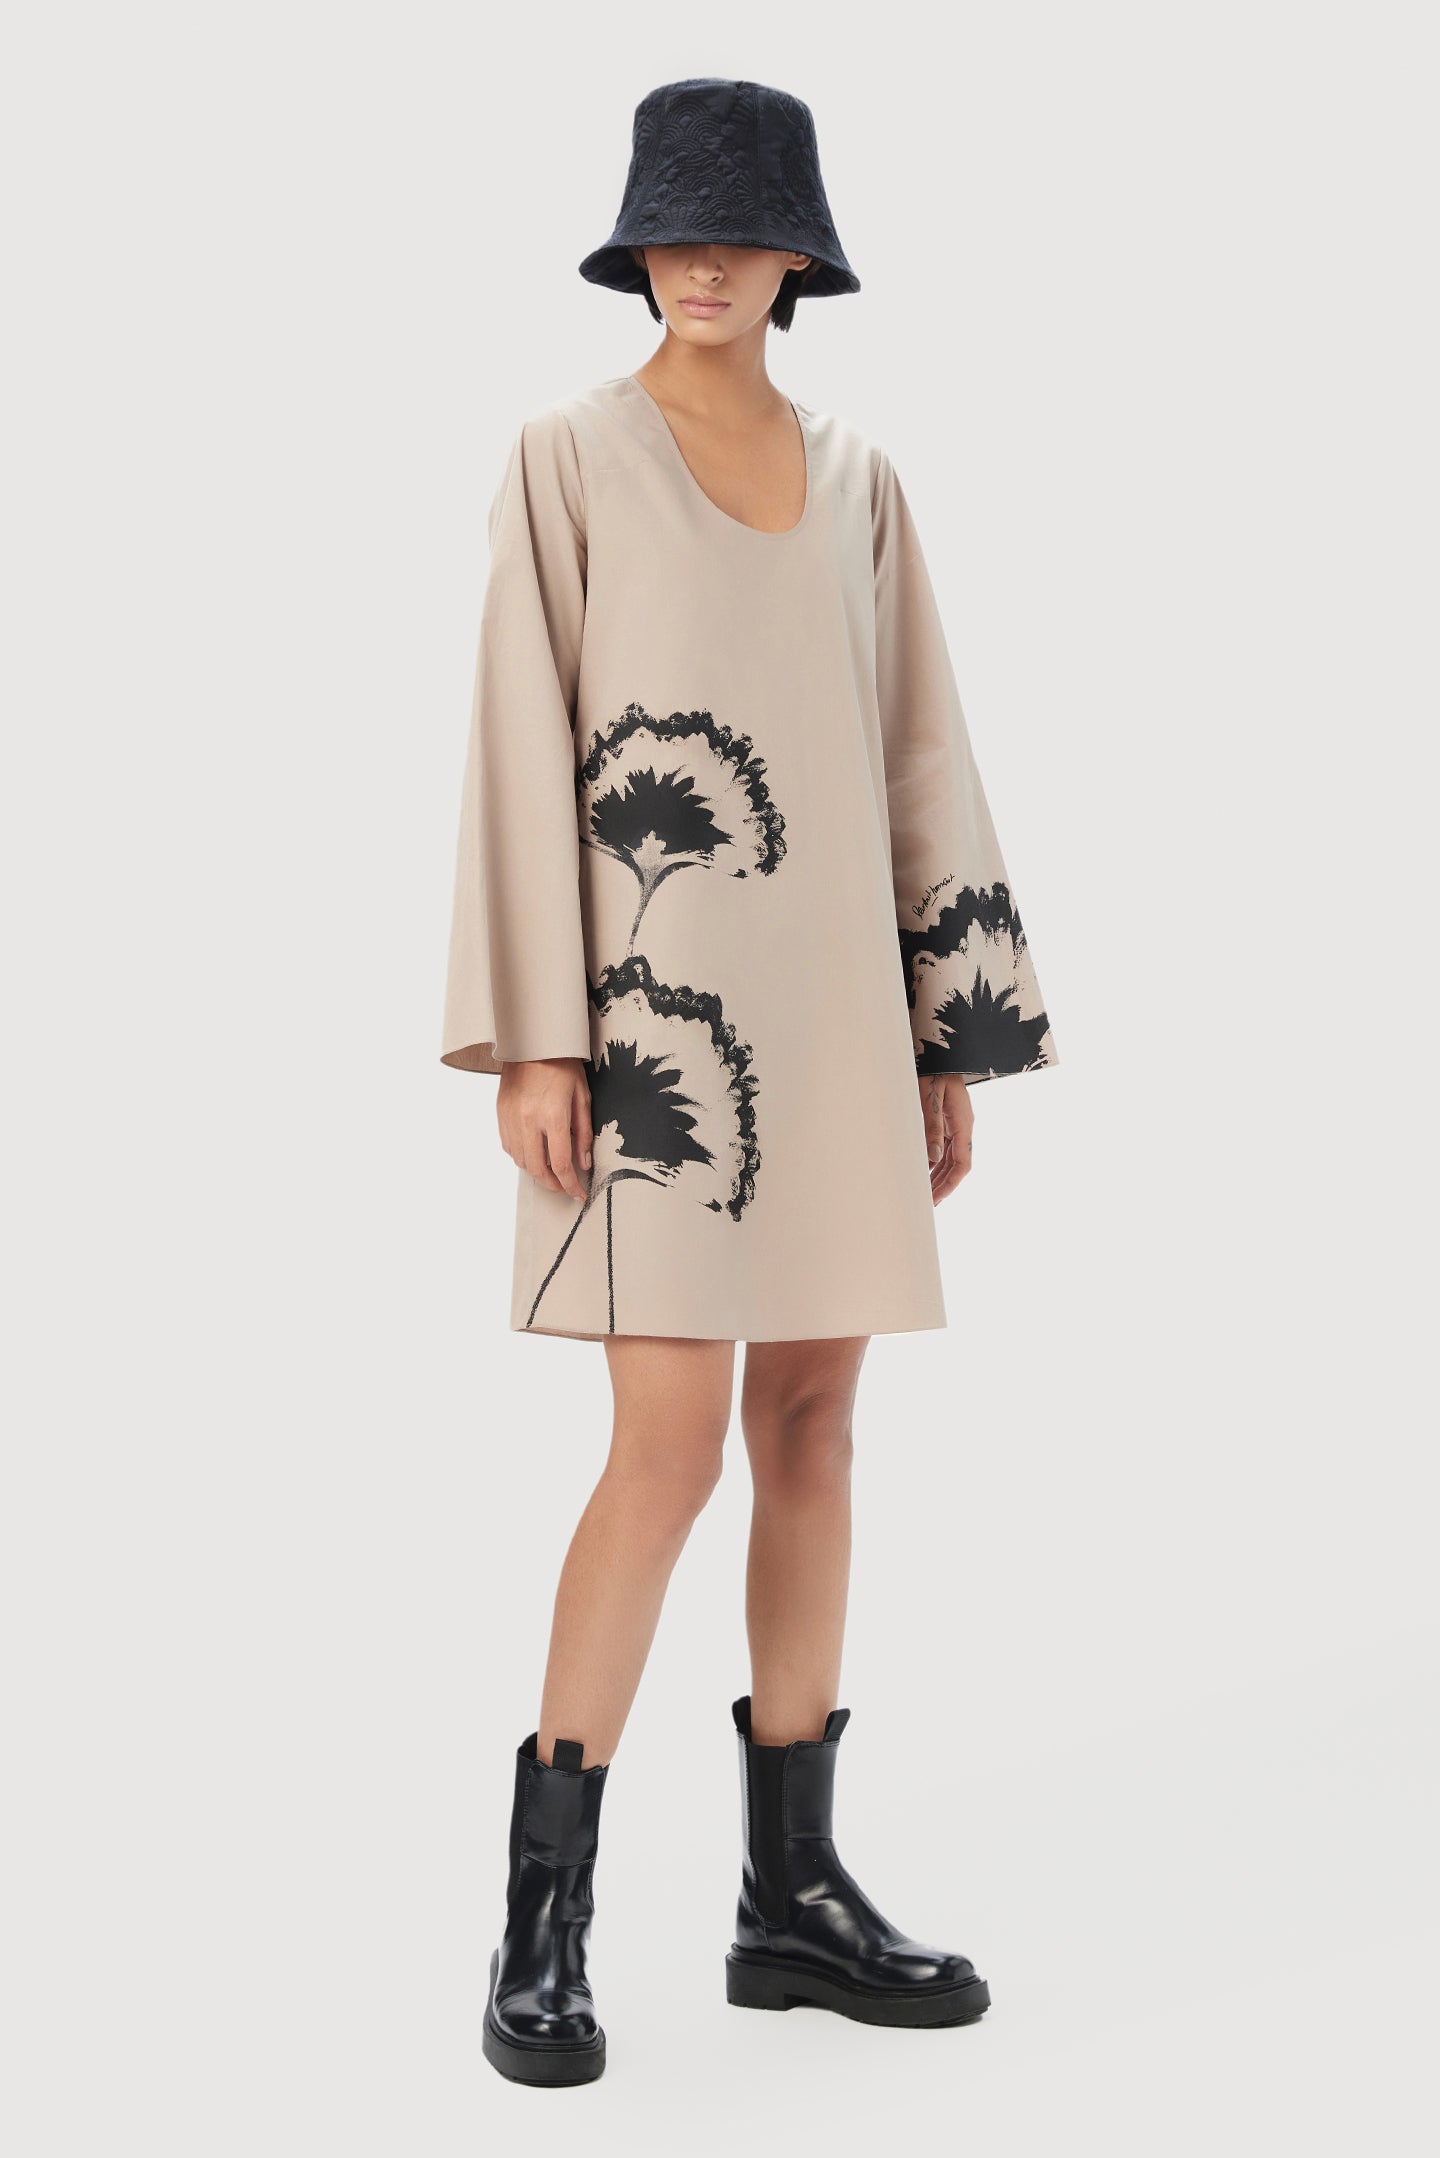 A-Line Oval Neck Dress with Bell Sleeves